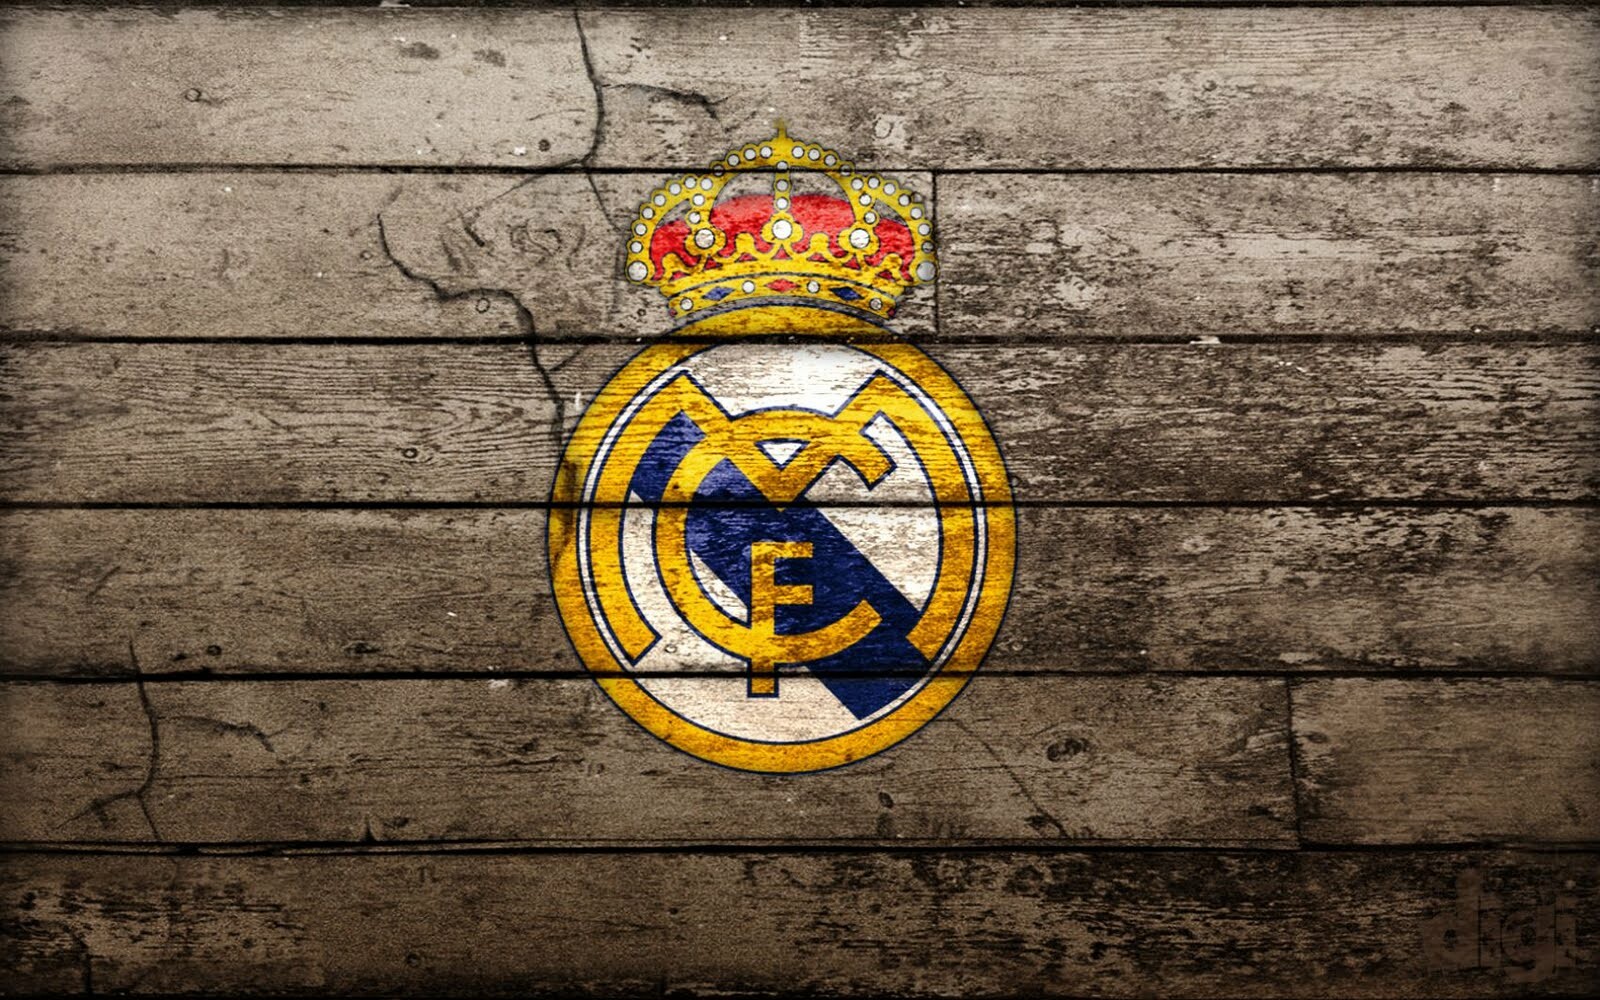 41+ Real Madrid Wallpapers: HD, 4K, 5K for PC and Mobile | Download free  images for iPhone, Android